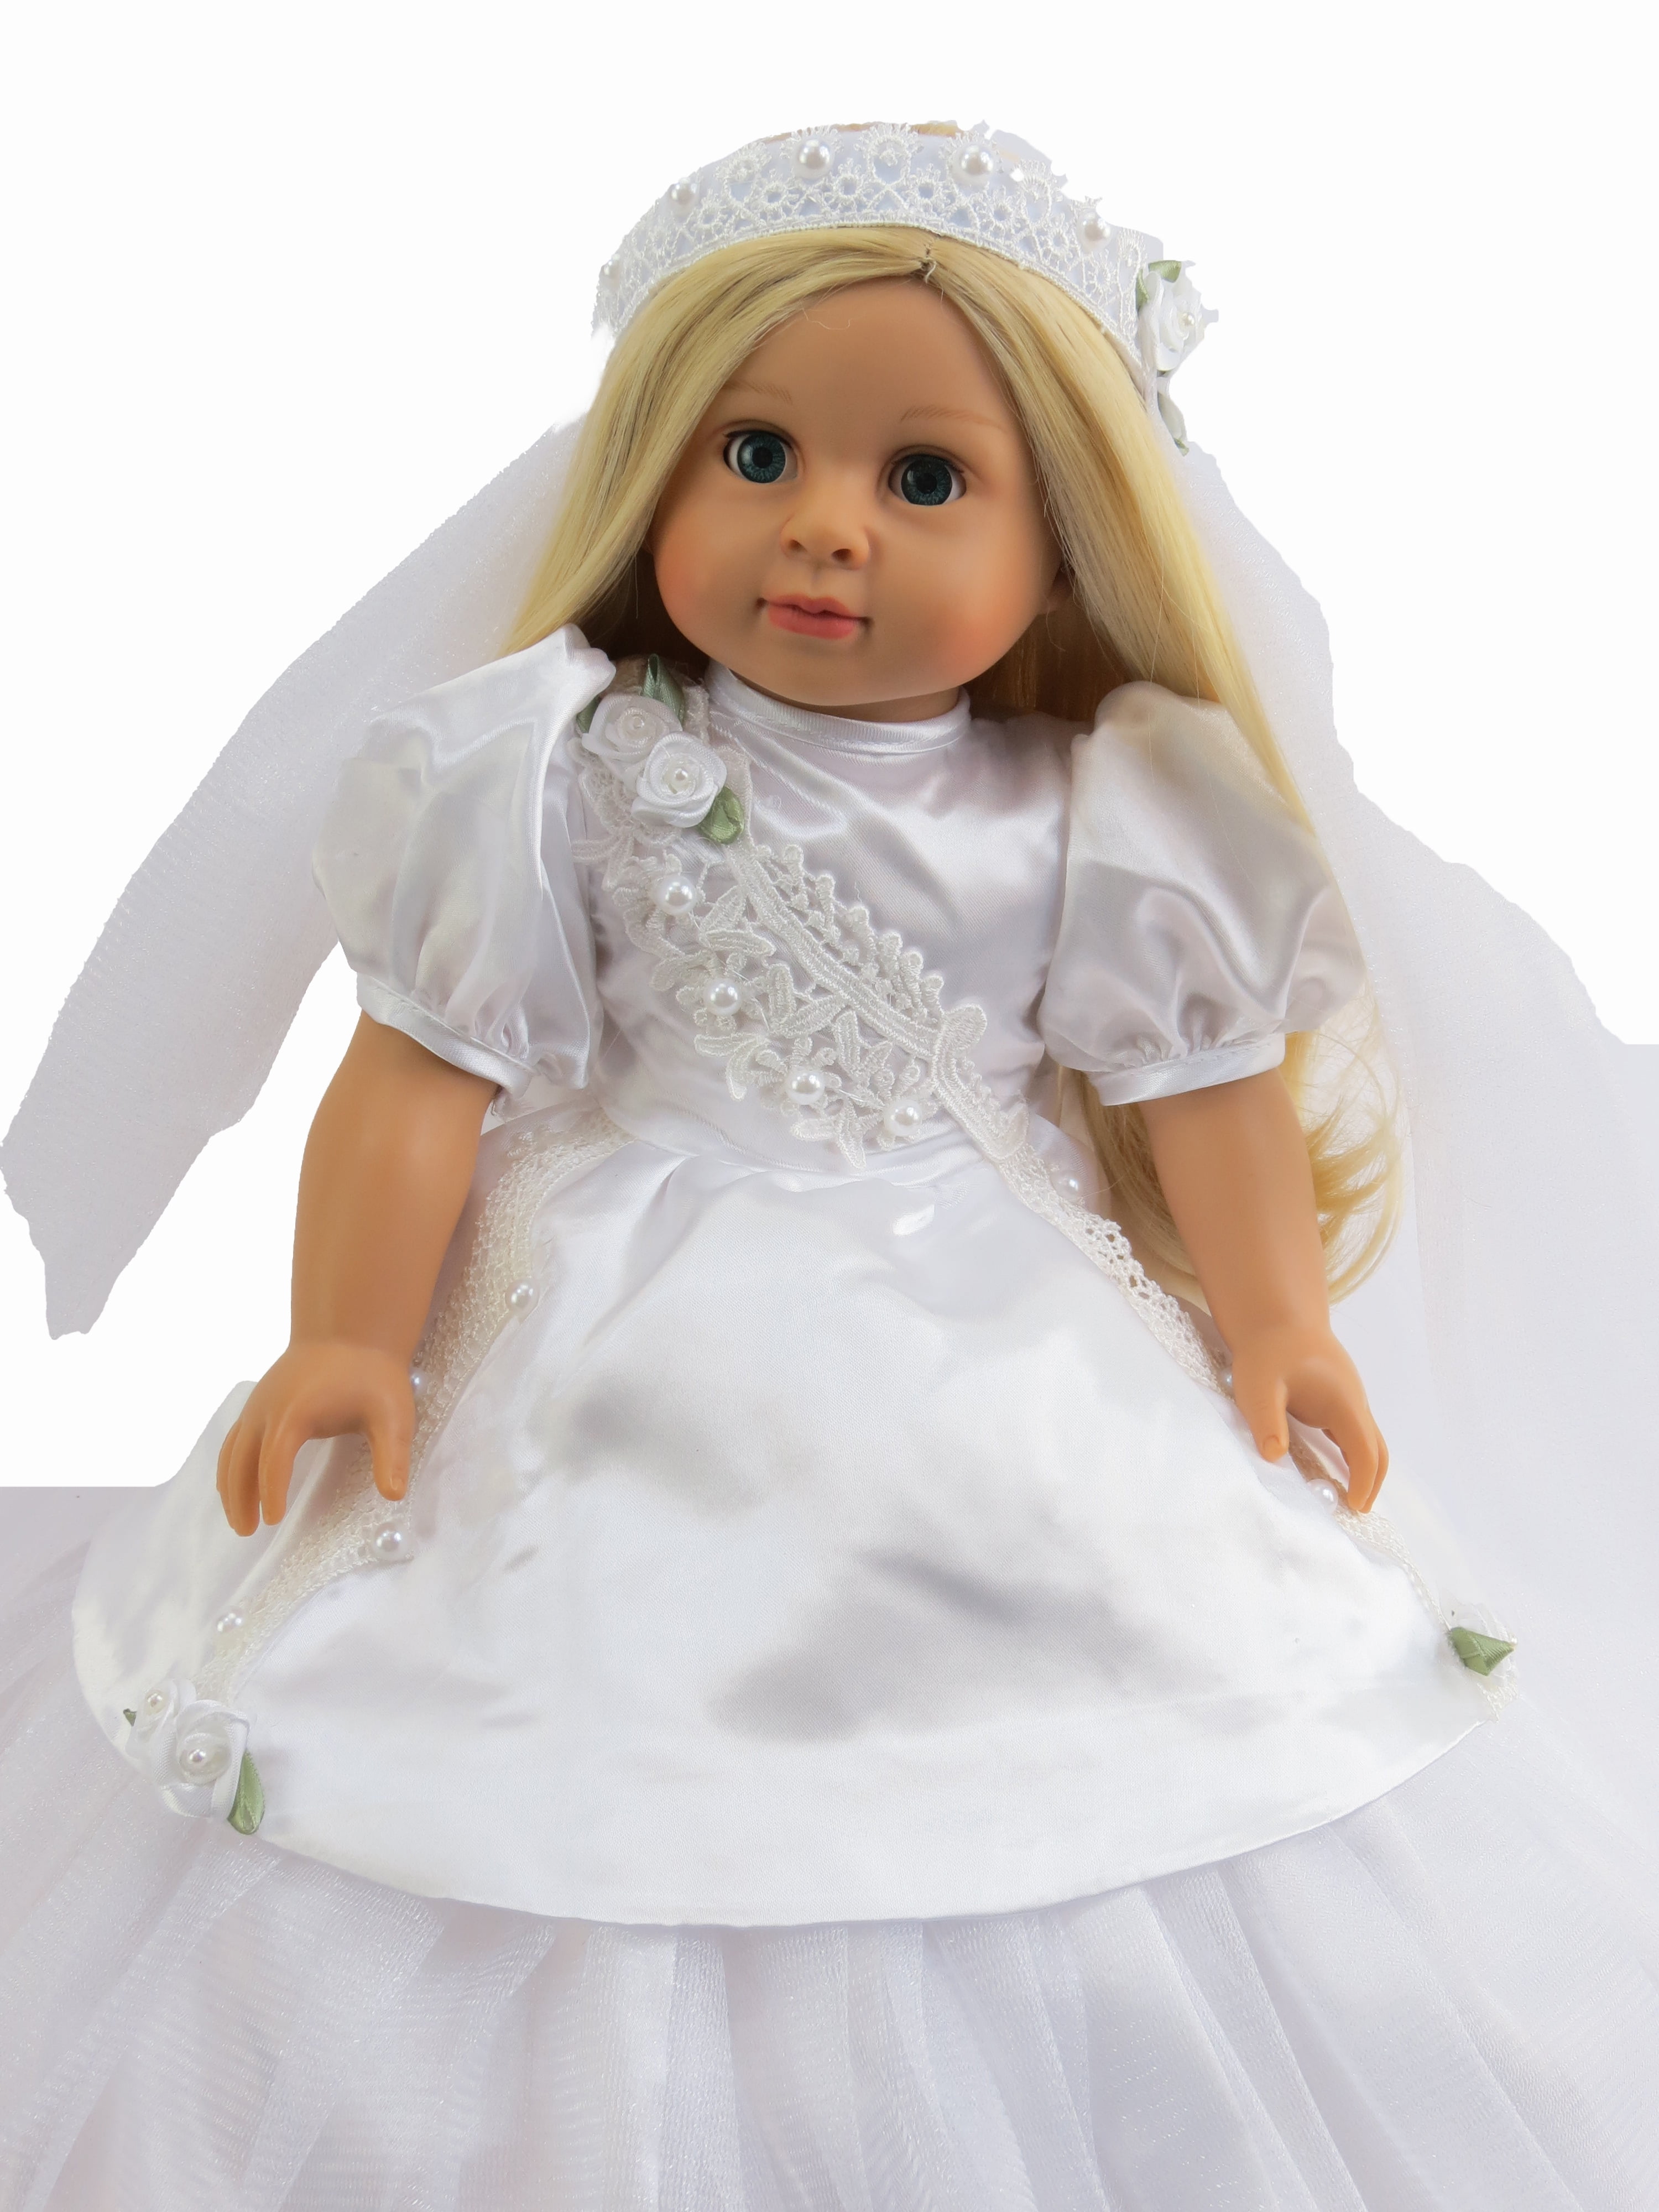 18" American Girl/Our Generation Dolls Clothes Wedding Dress with Veil!